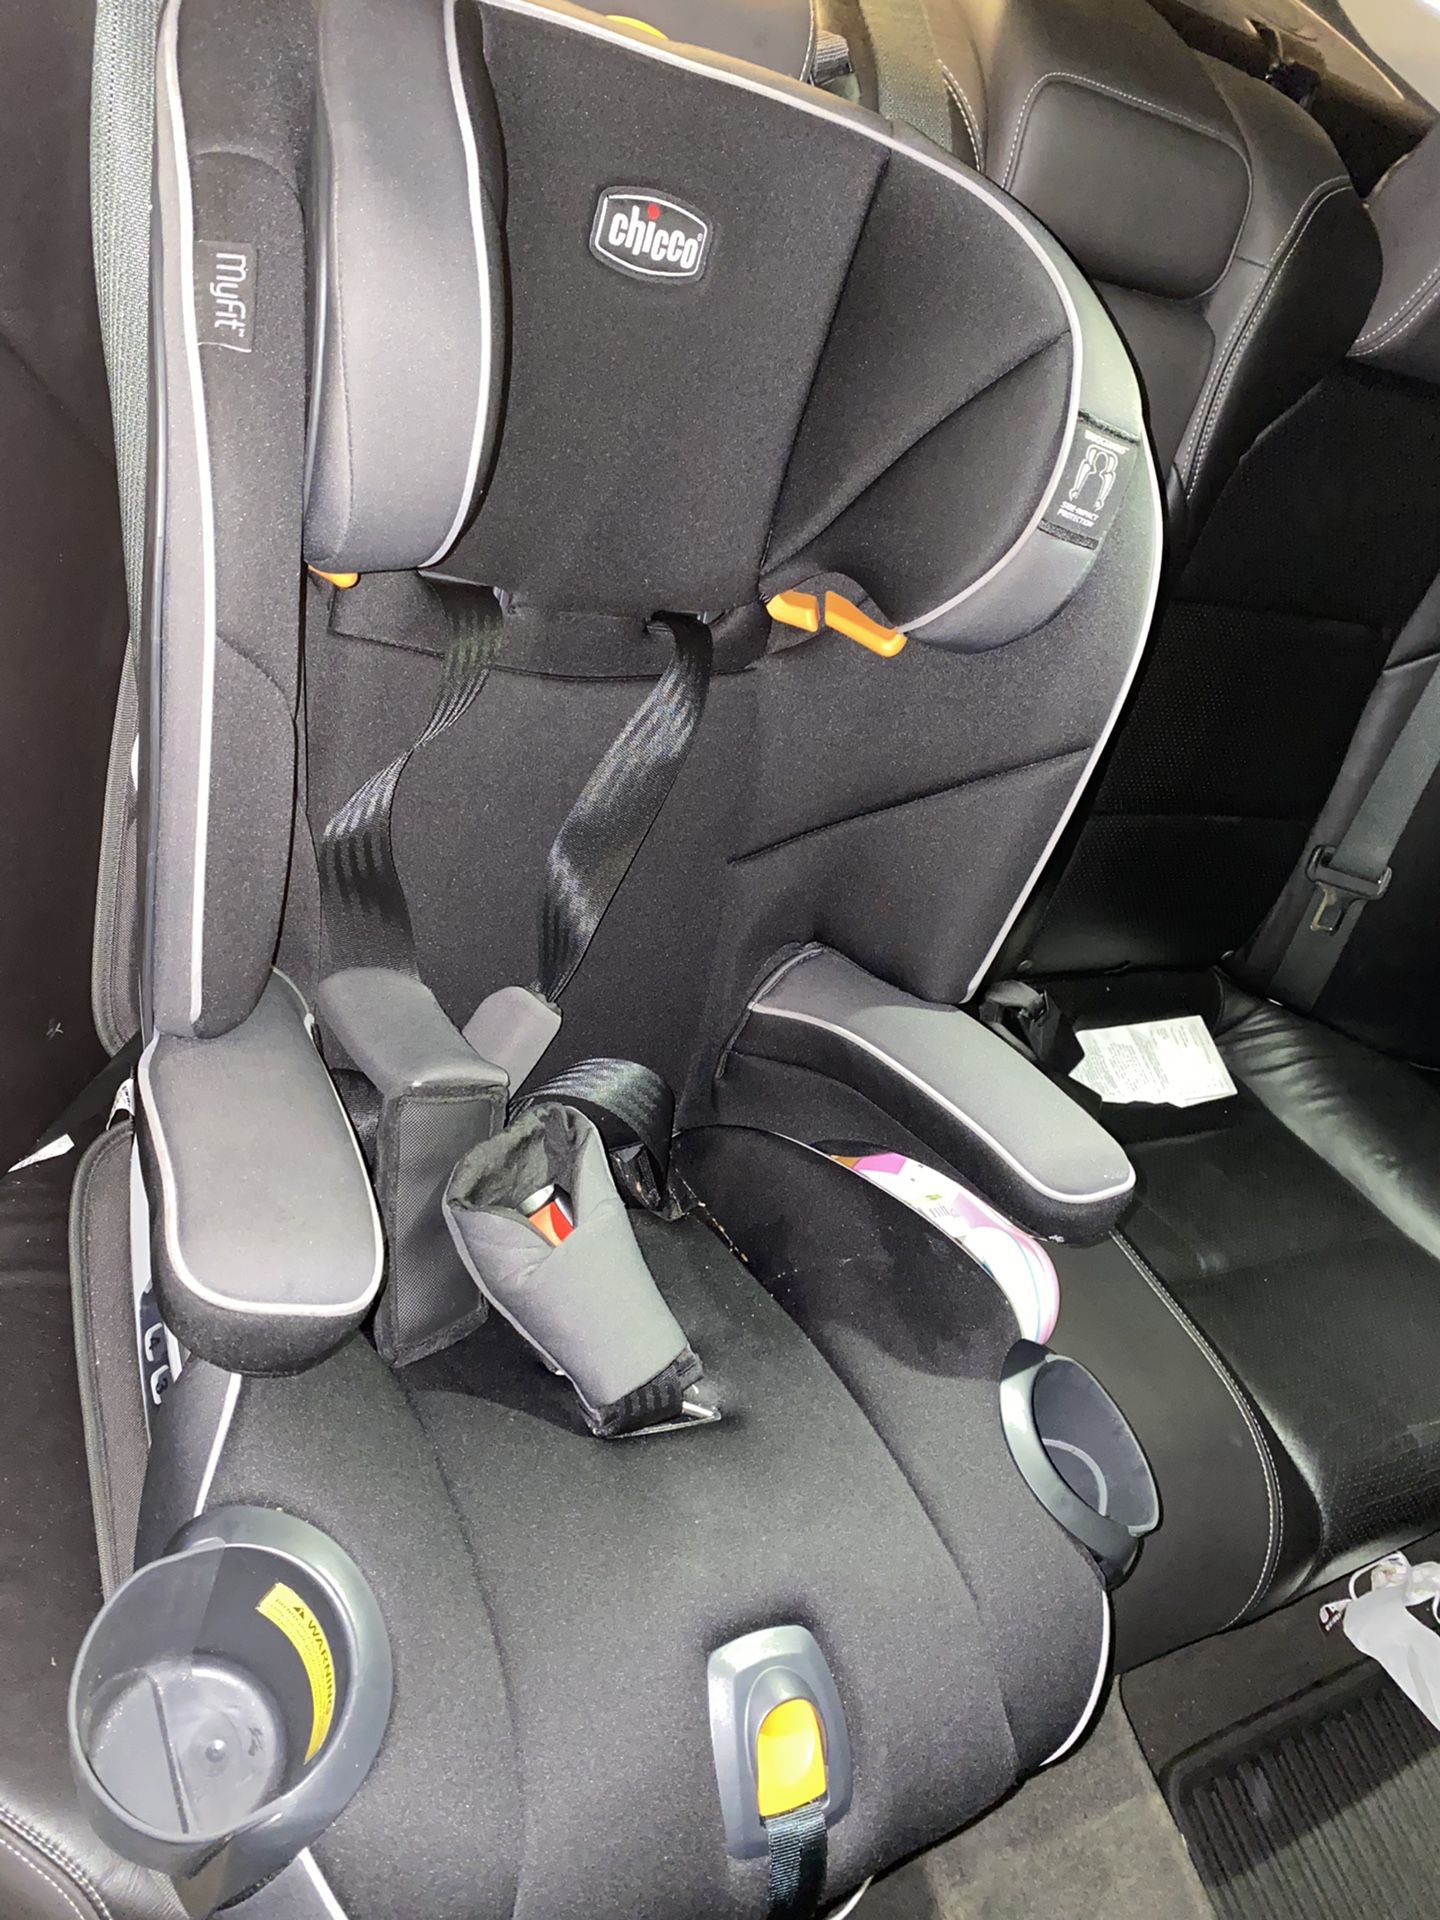 Chicco 4 In 1 Convertible Car Seat